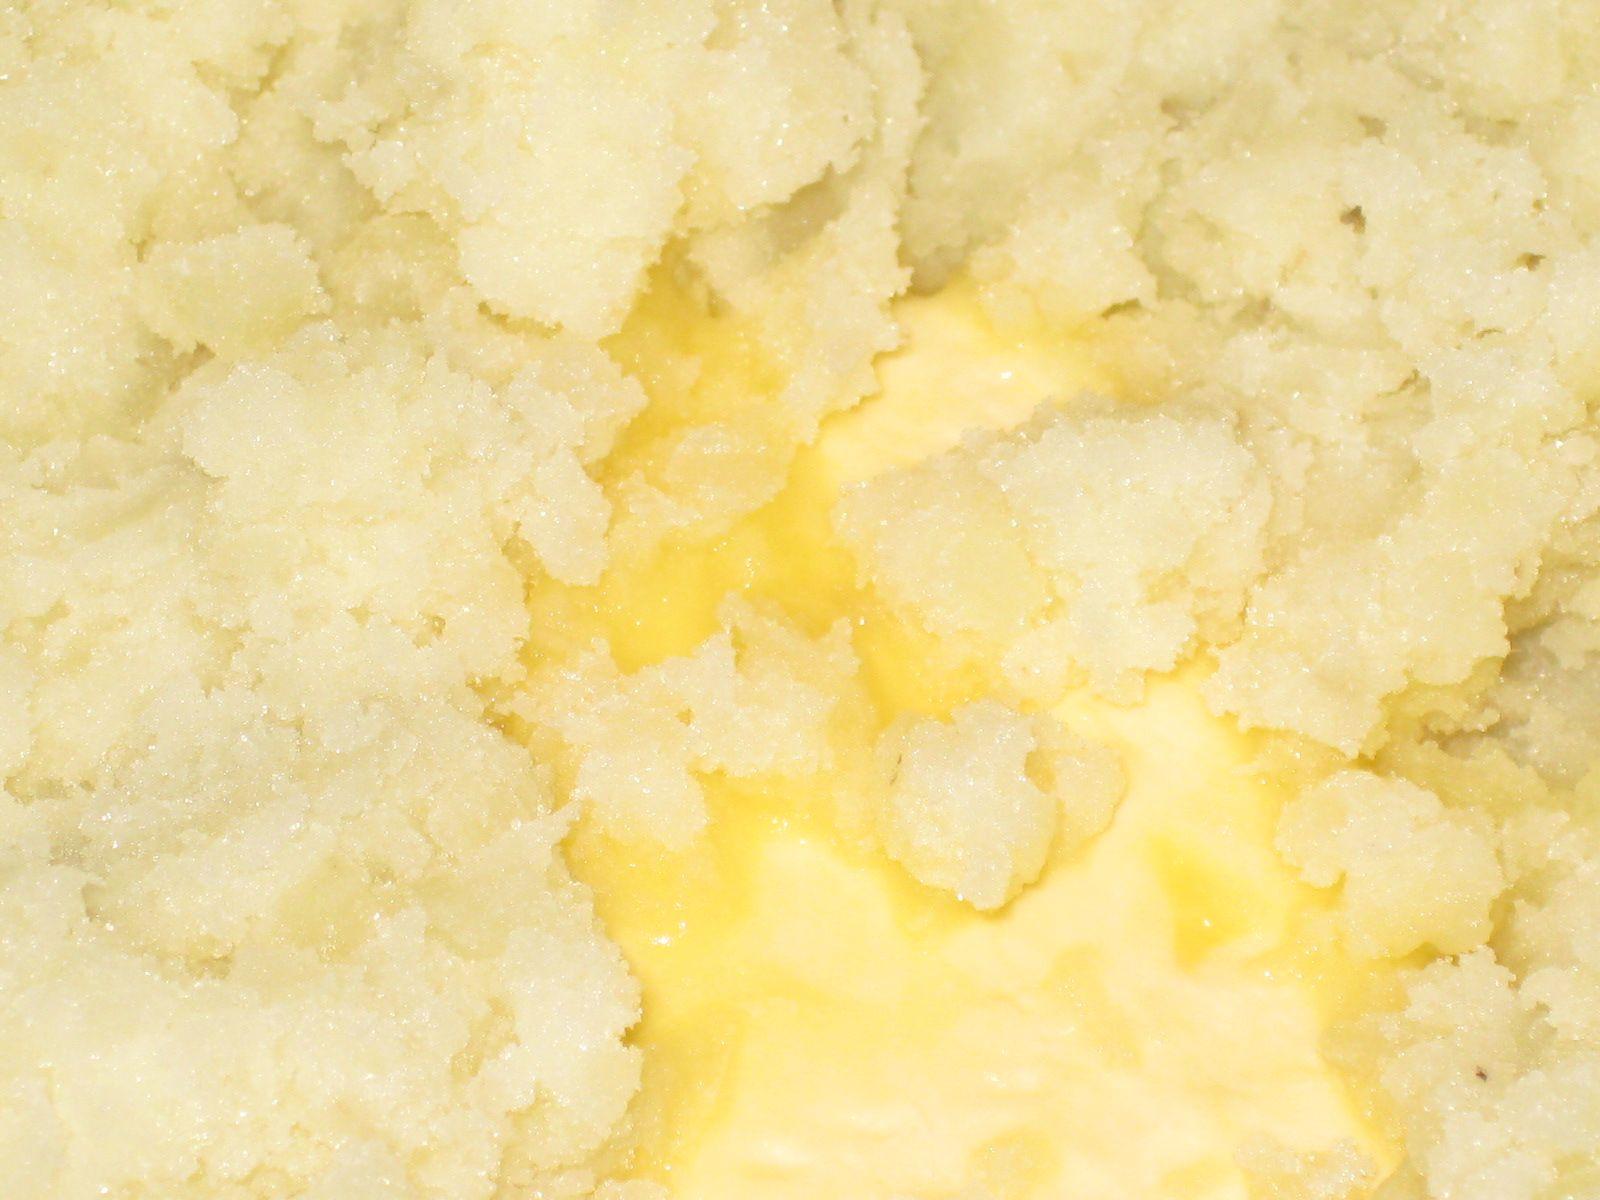 Come Taste This!: When you're sick, eat Mashed Potatoes